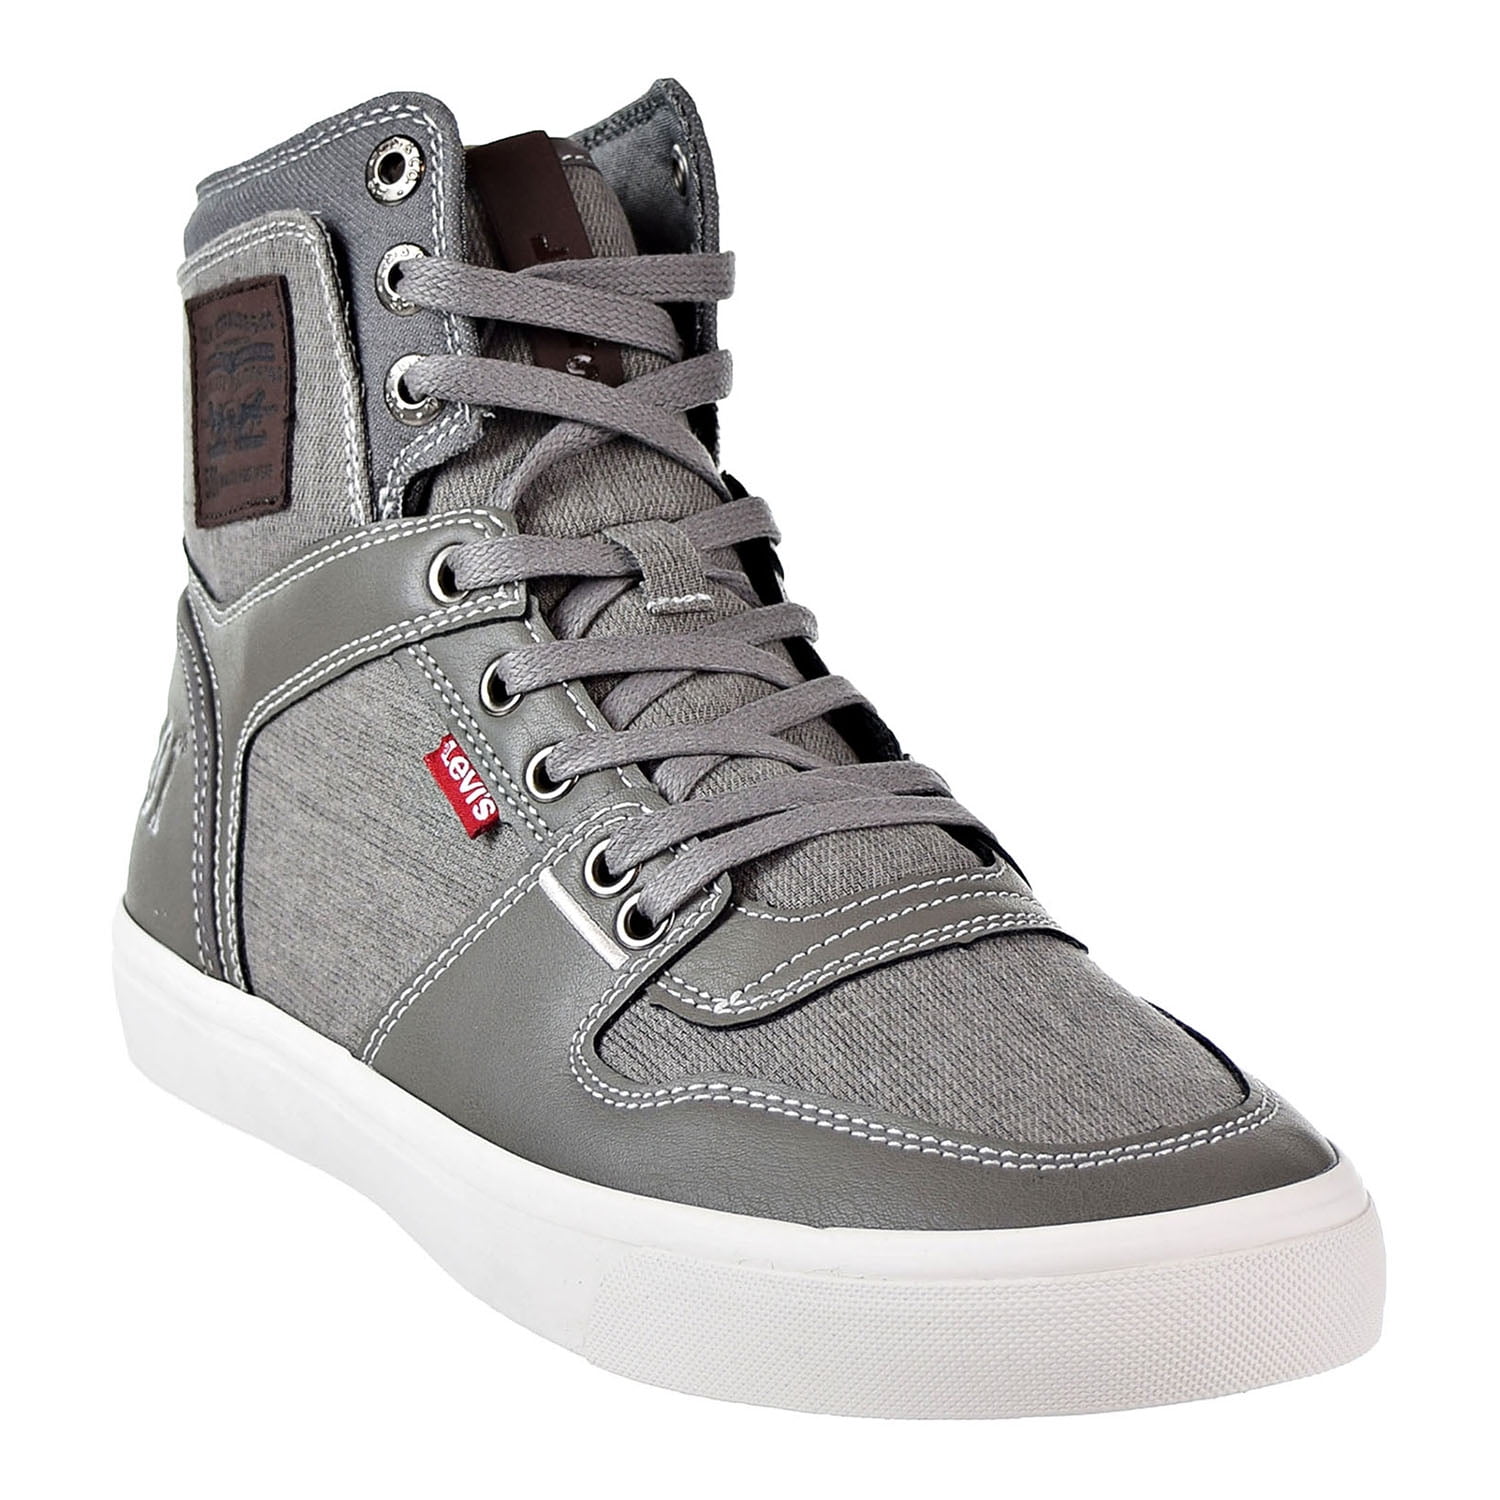 Levi's Sneakers : Buy Levi's White Casual Sneakers Online | Nykaa Fashion.